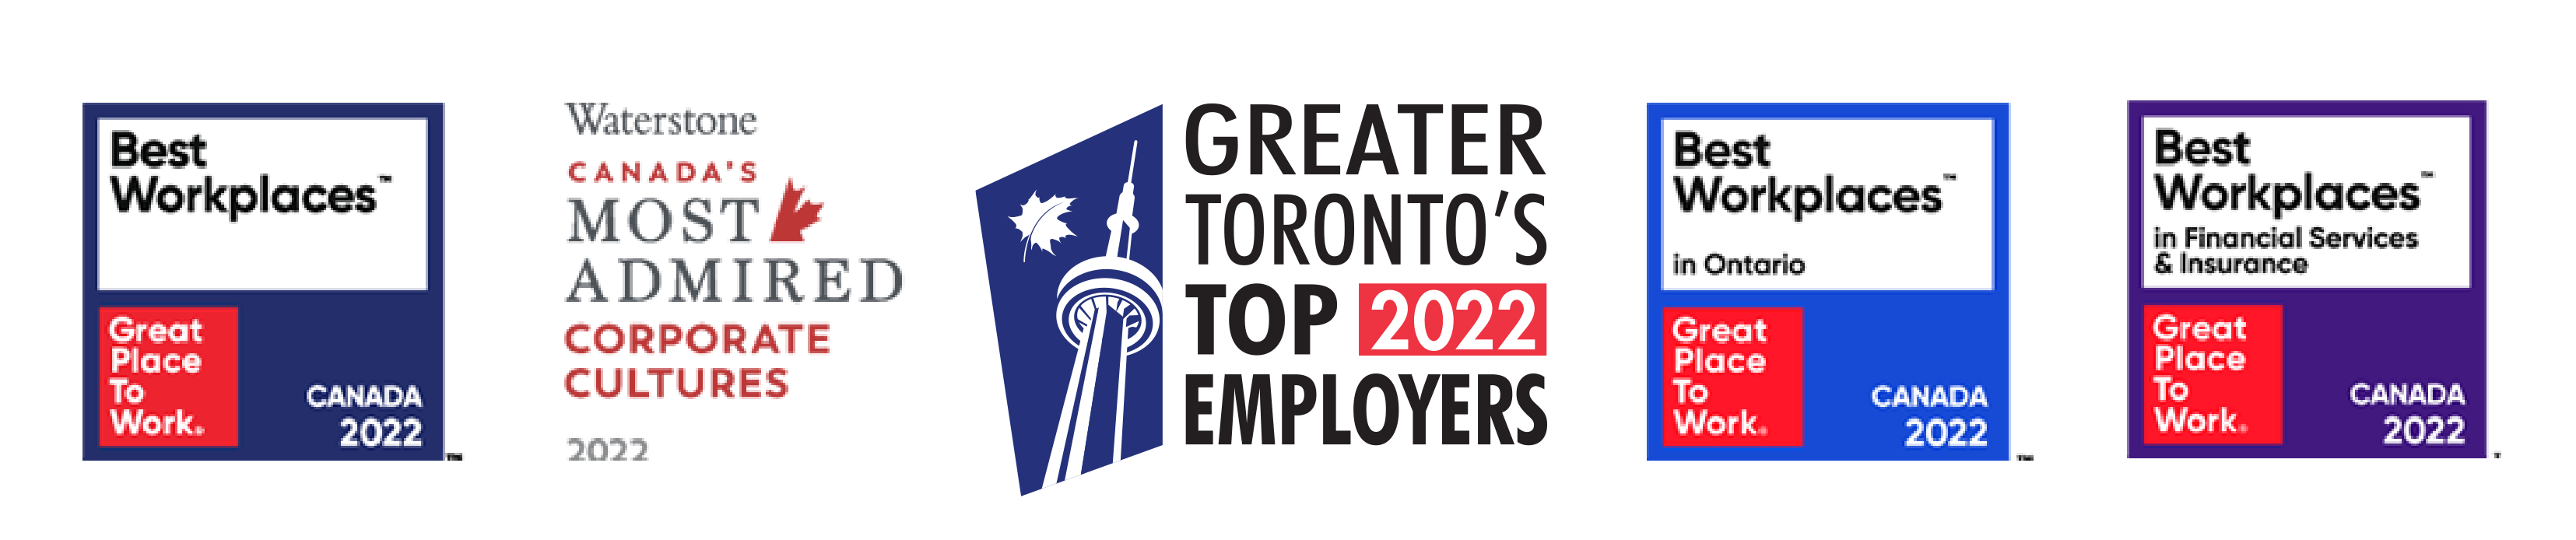 Logos for the  Best Workplaces - Great Place to Work Canada 2003, Best Workplaces - Great Place to Work Canada 2002, Canada's Most Admired Corporate Cultures 2022, Toronto Top 2022 Employers, Best Workplaces in Ontario - Great Place to Work 2022 and Best Workplaces in Financial Services & Insurance - Great Place to Work Canada 2022.